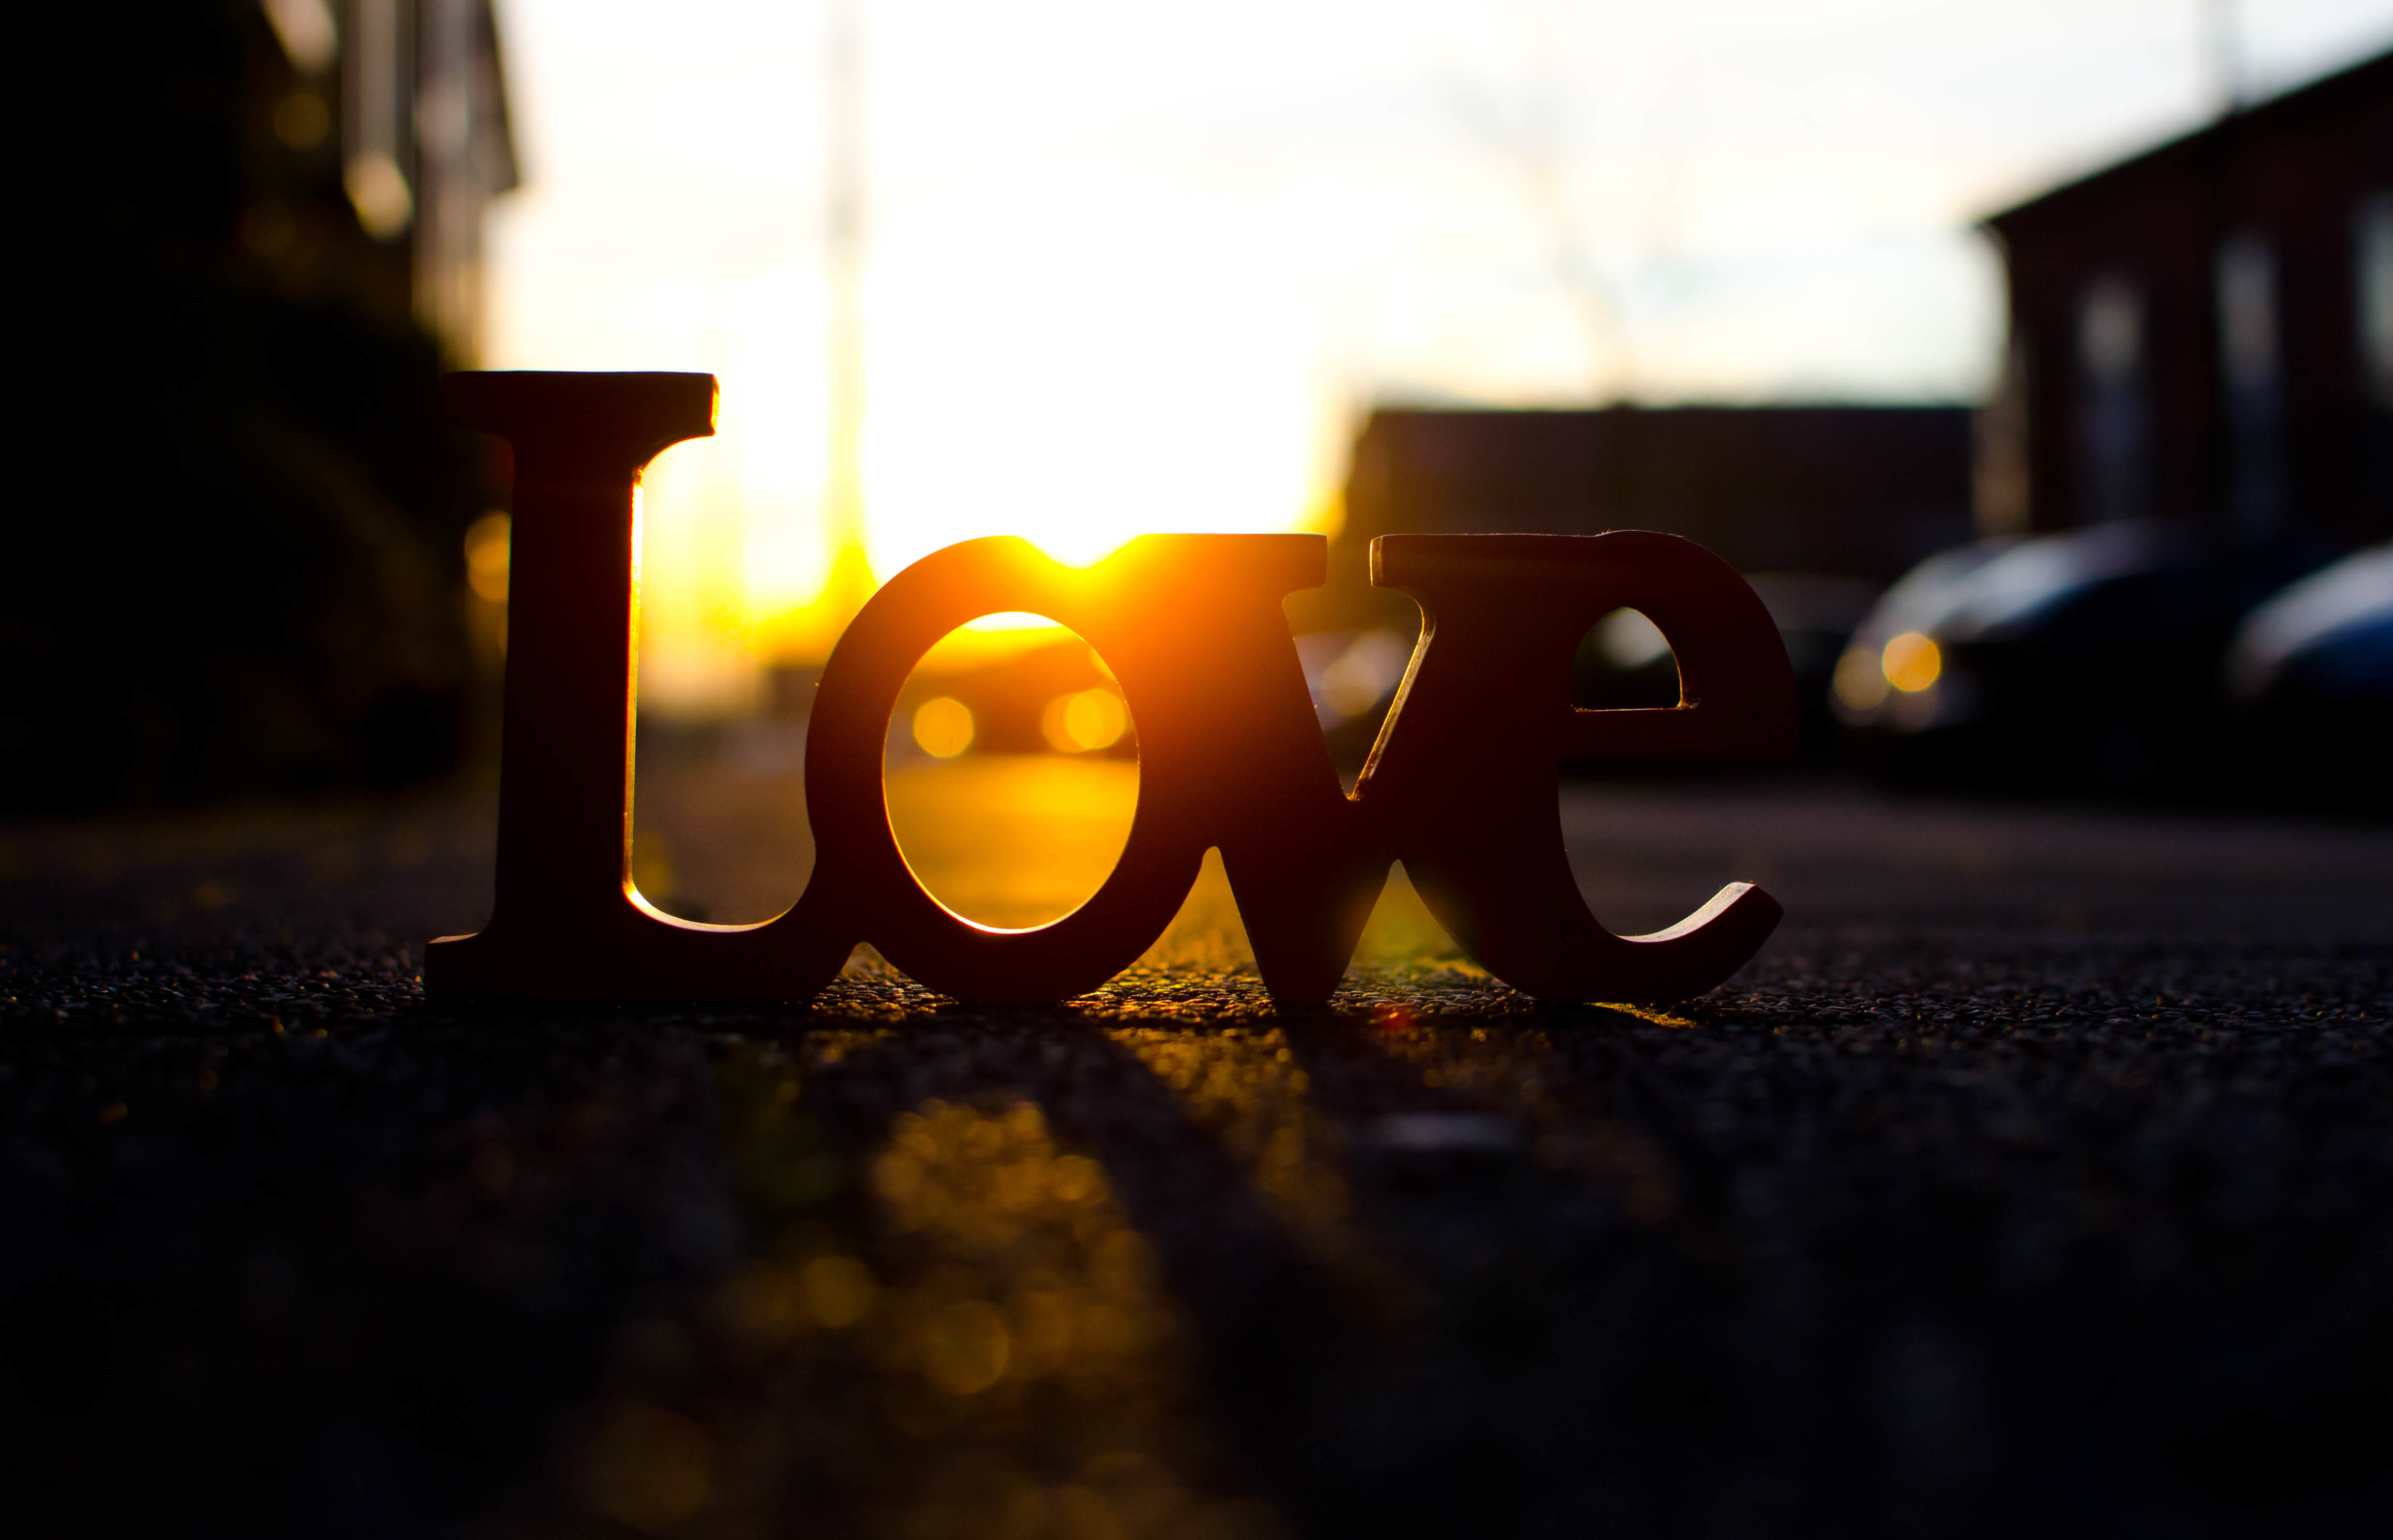 Download wallpaper road, the sun, rays, love, sunset, letters, background,  Wallpaper, street, mood, love, widescreen, full screen, HD wallpapers,  widescreen, section mood in resolution 4626x2977